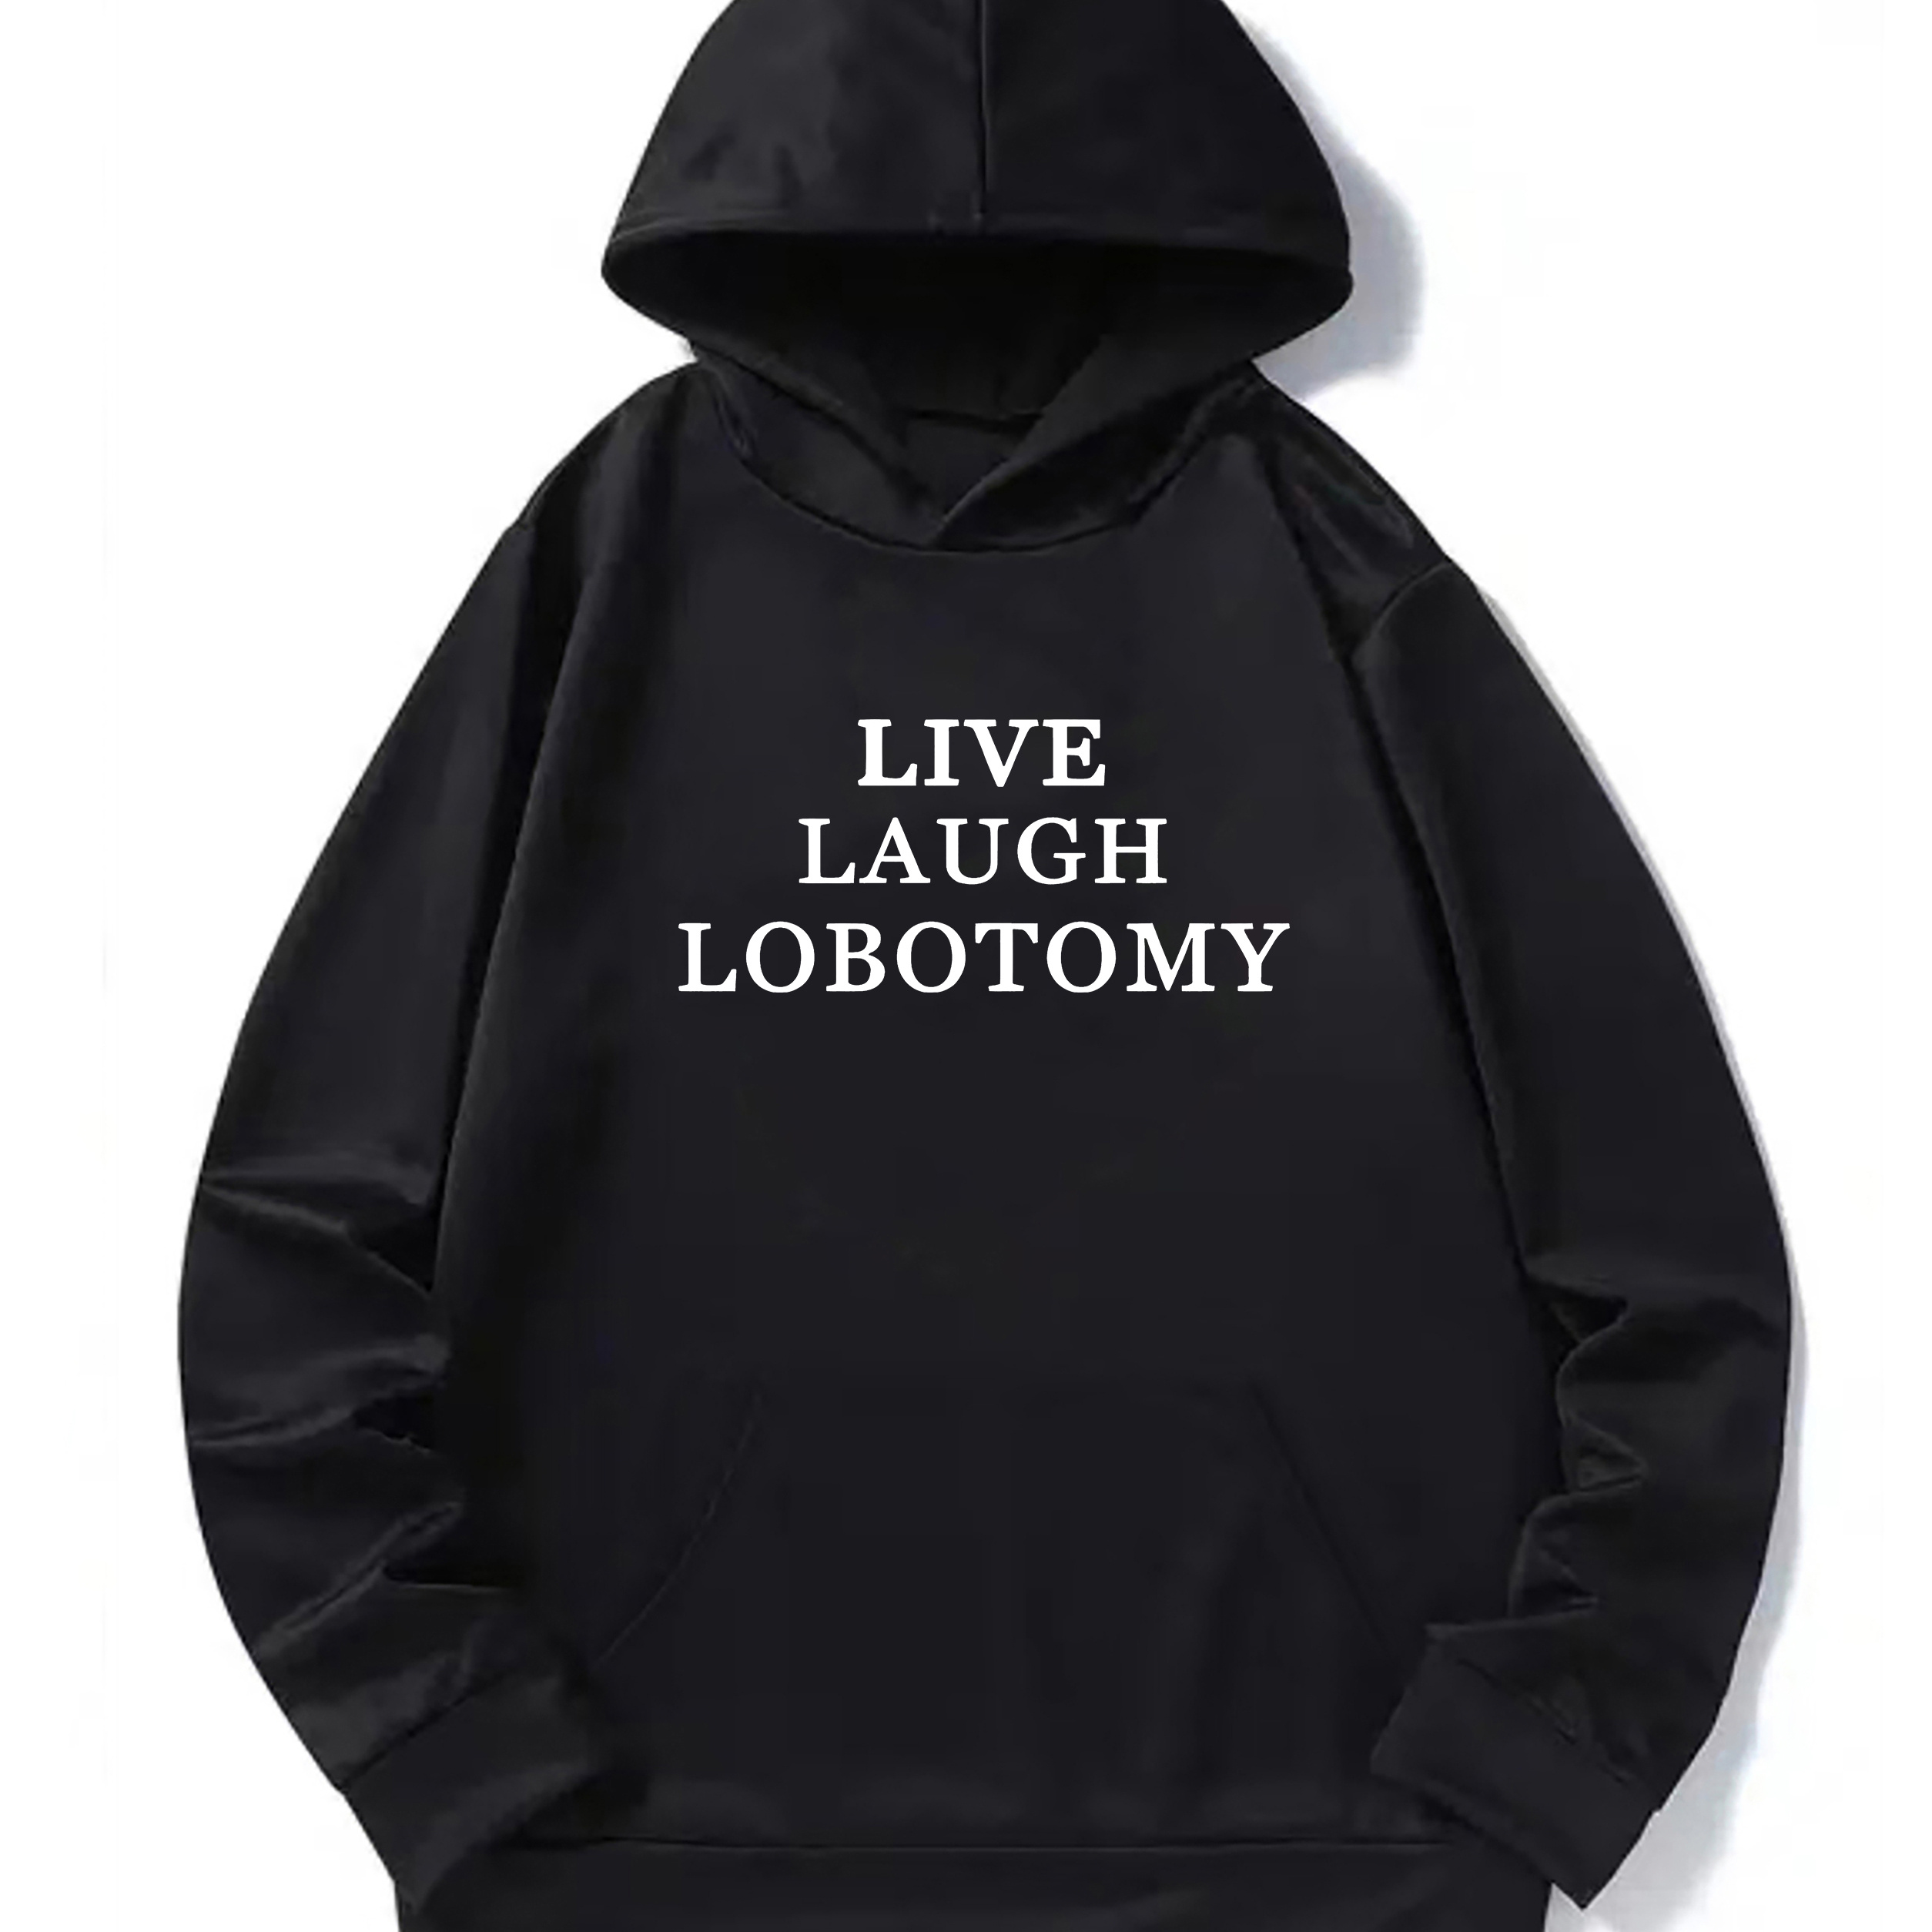 

Live Laugh Lobotomy Print Men's Pullover Round Neck Hoodies With Kangaroo Pocket & Long Sleeve Hooded Sweatshirt Loose Casual Top For Autumn Winter Men's Clothing As Gifts